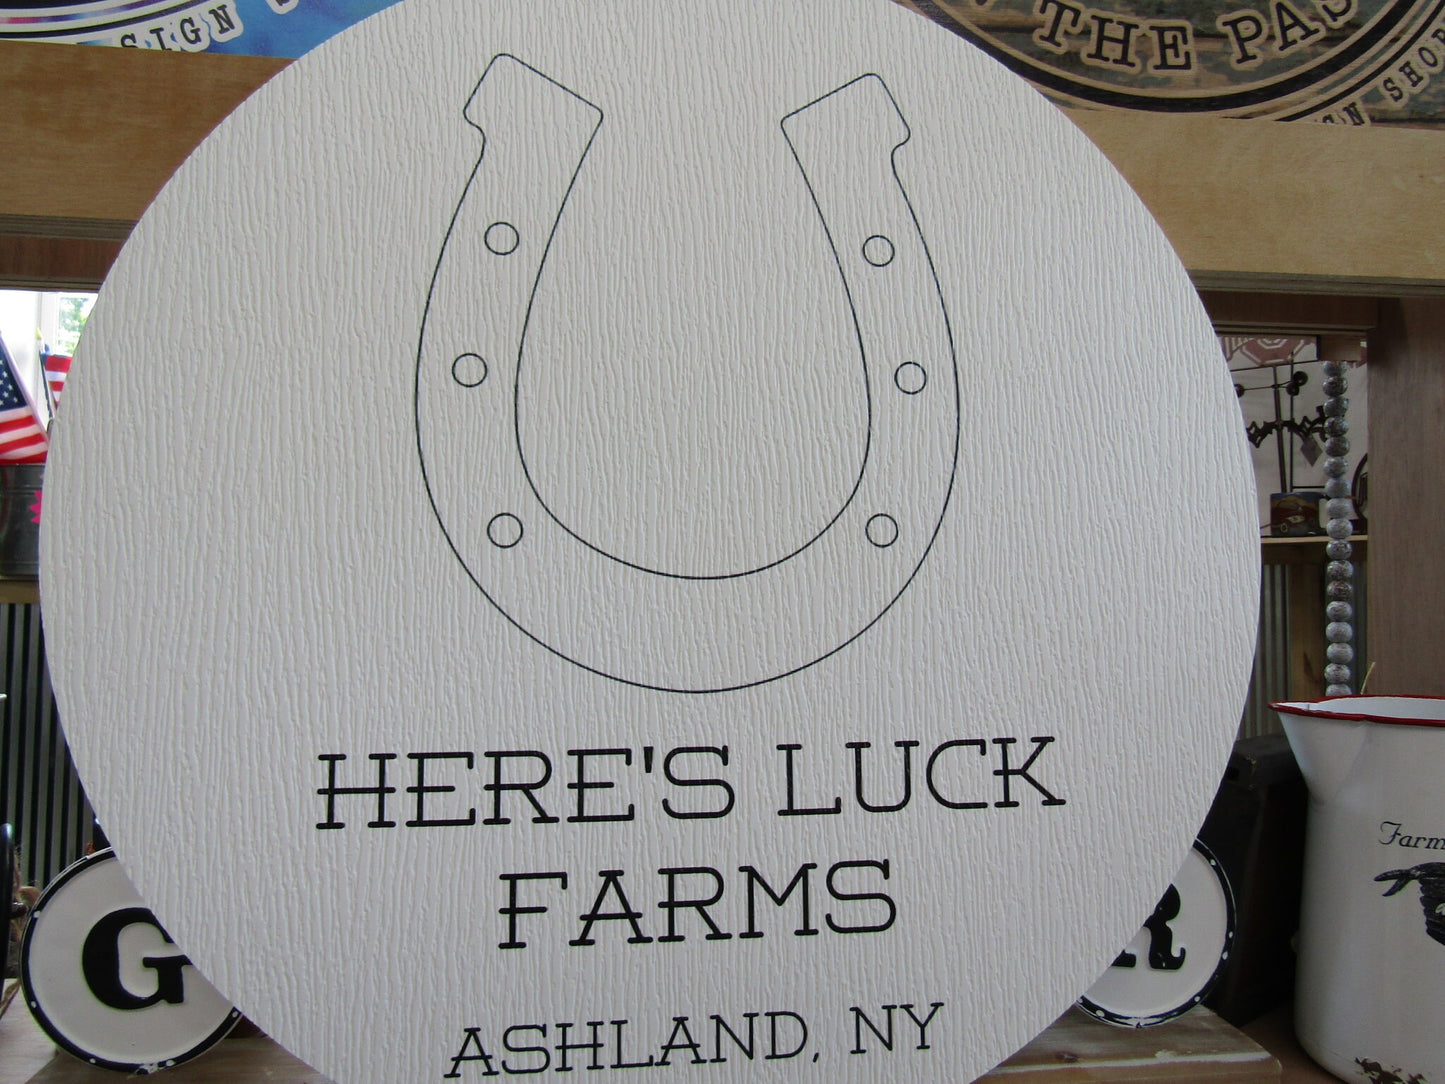 Custom Weatherproof PVC Sign Horseshoe Luck Farms Textured Personalized Circle Round Ready for your Business Logo Wall Hanging Or Mounted